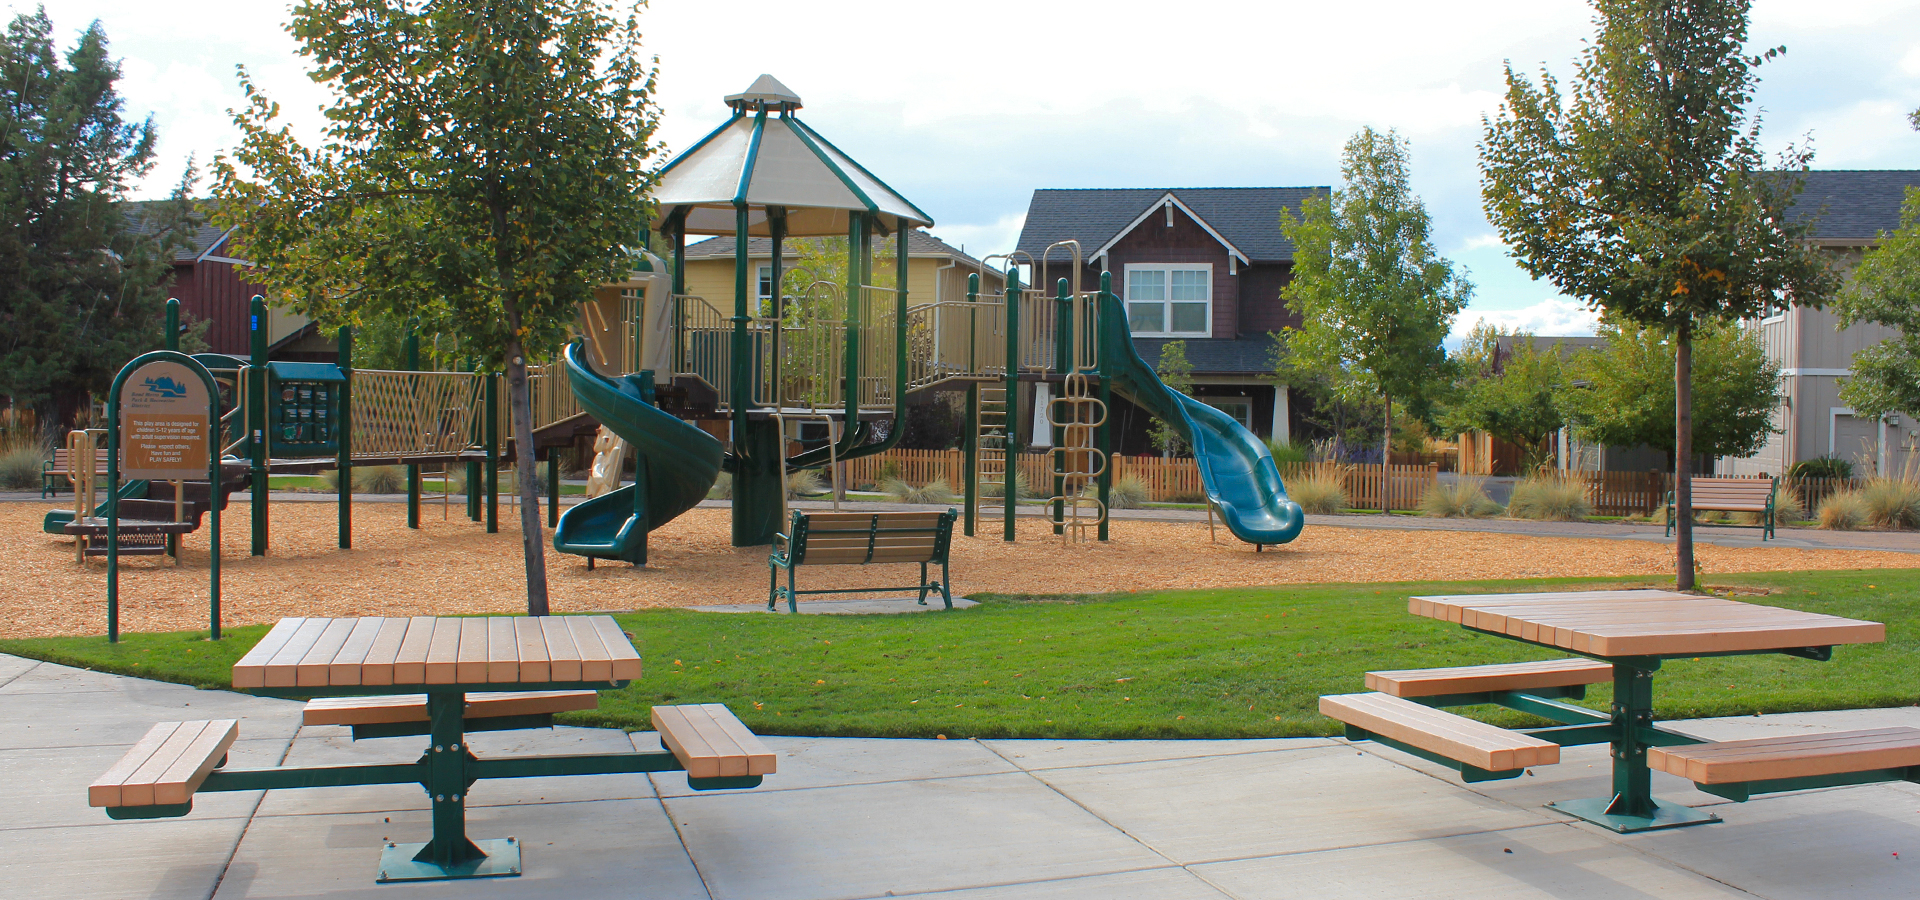 The play area at Gardenside Park.